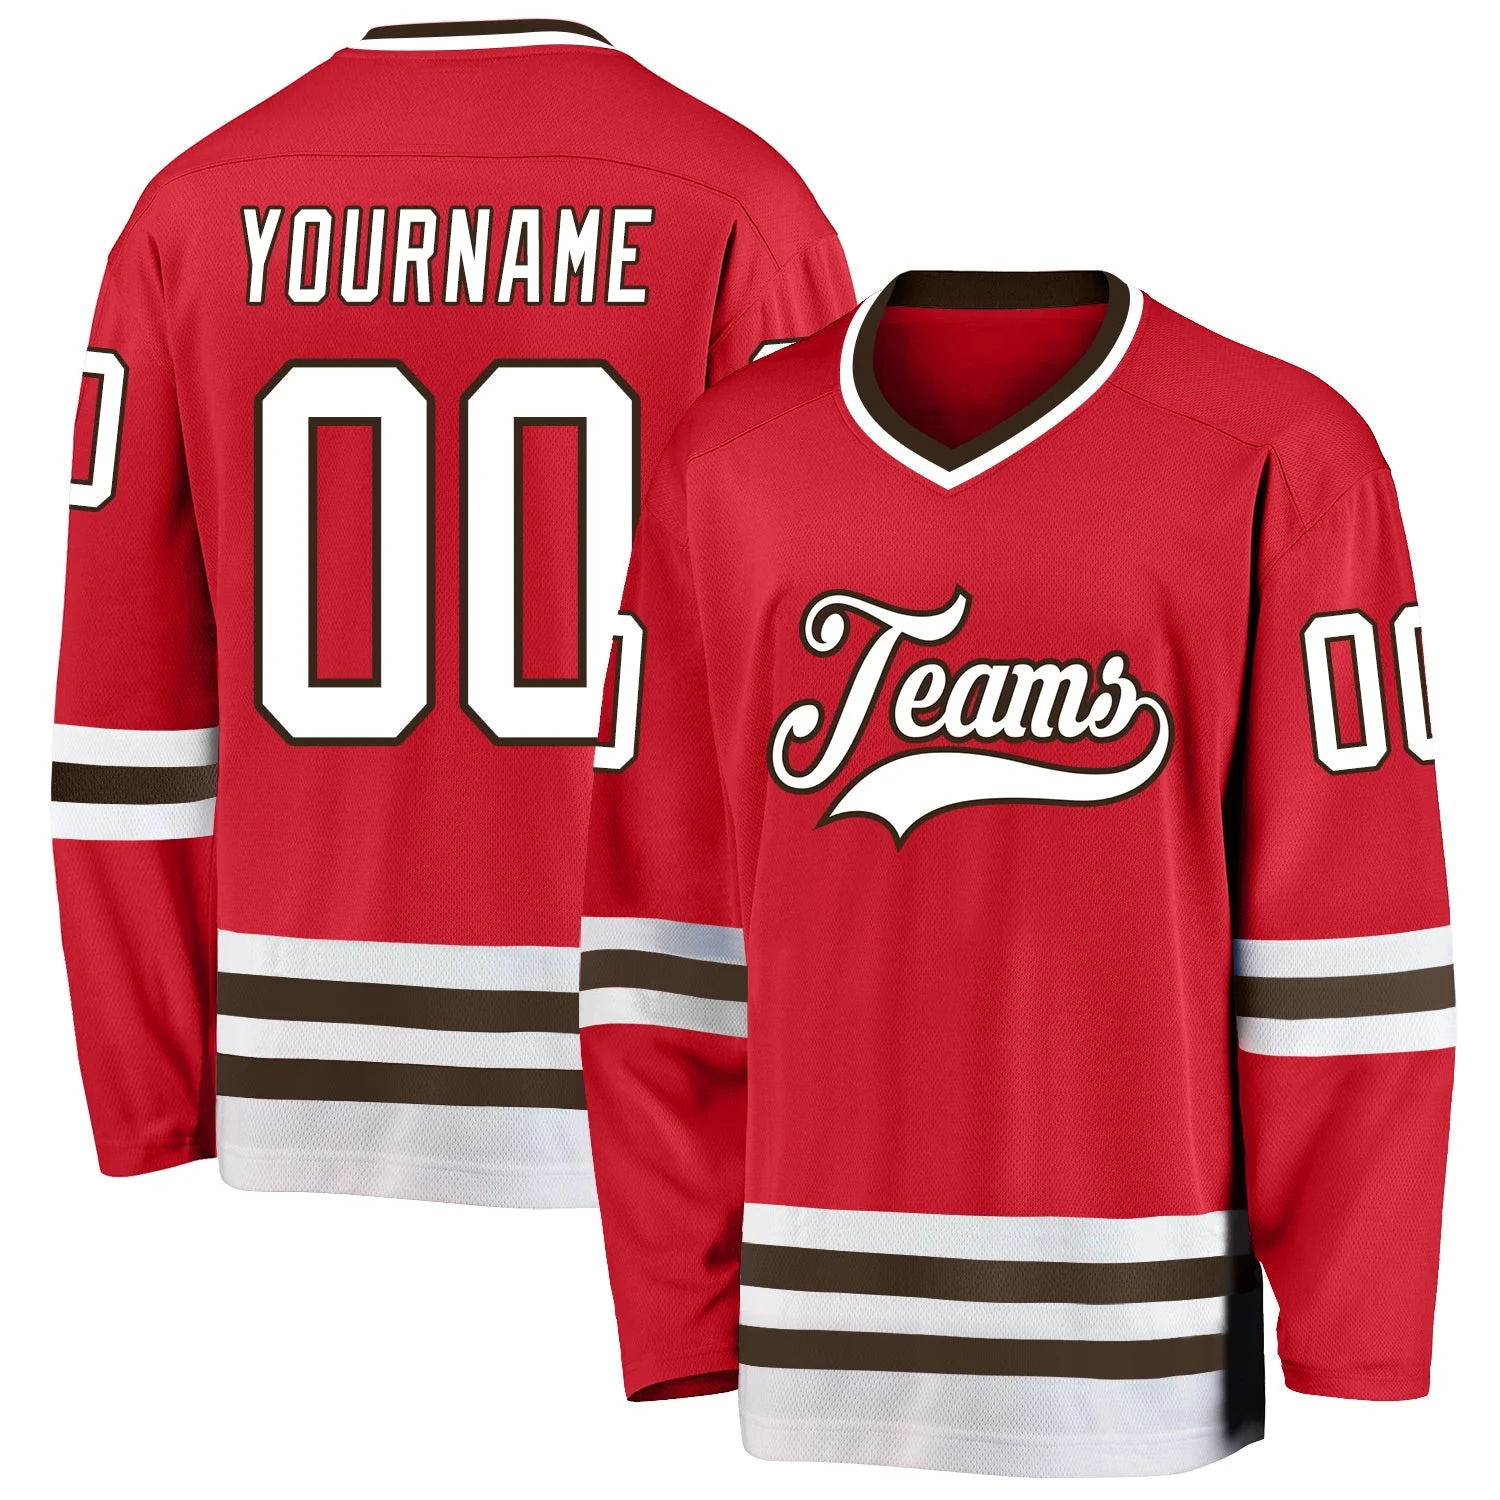 Stitched And Print Red White-brown Hockey Jersey Custom